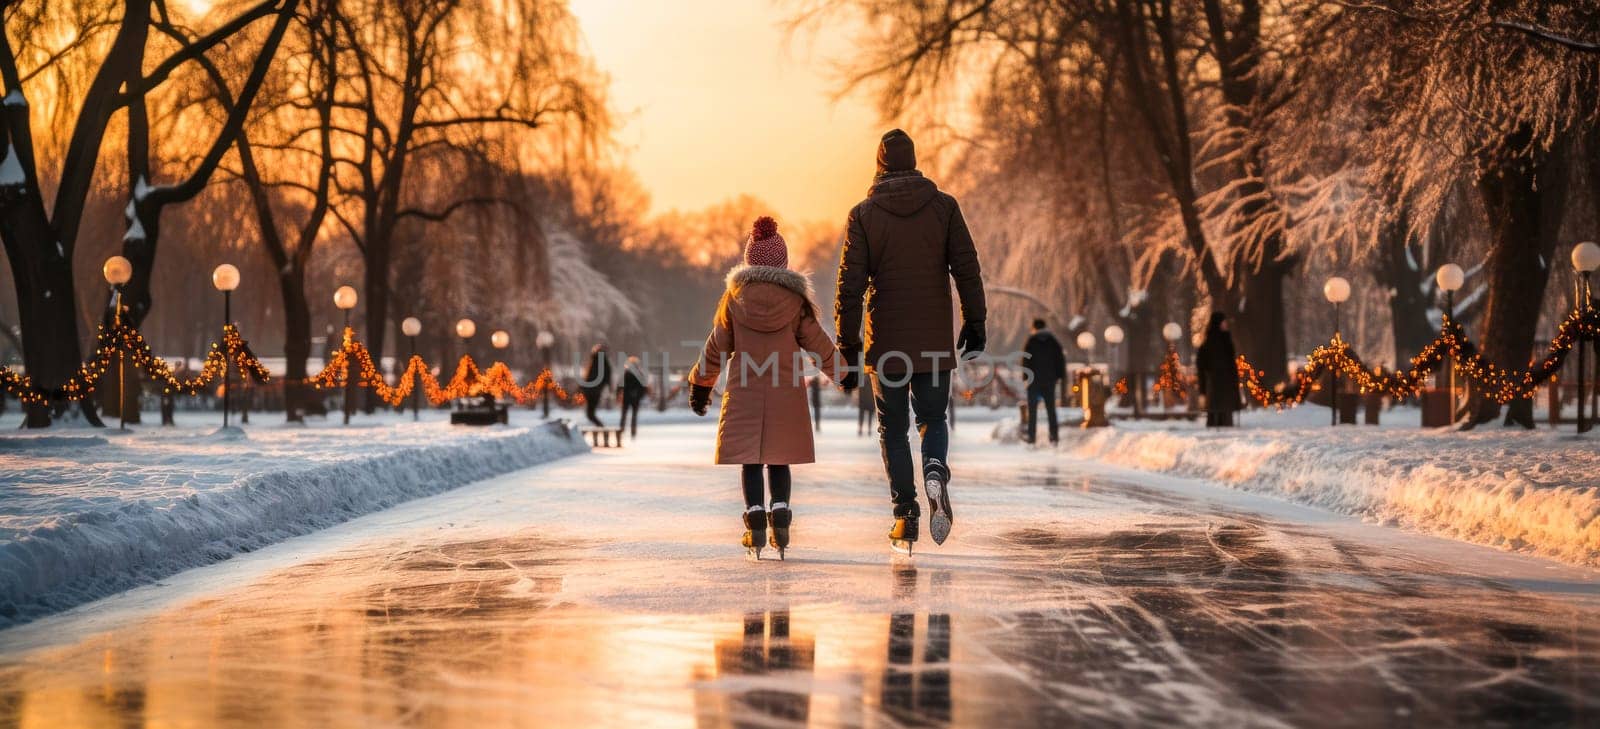 Dad and daughter enjoying winter ice skating. Family moments filled with fun and fresh air.